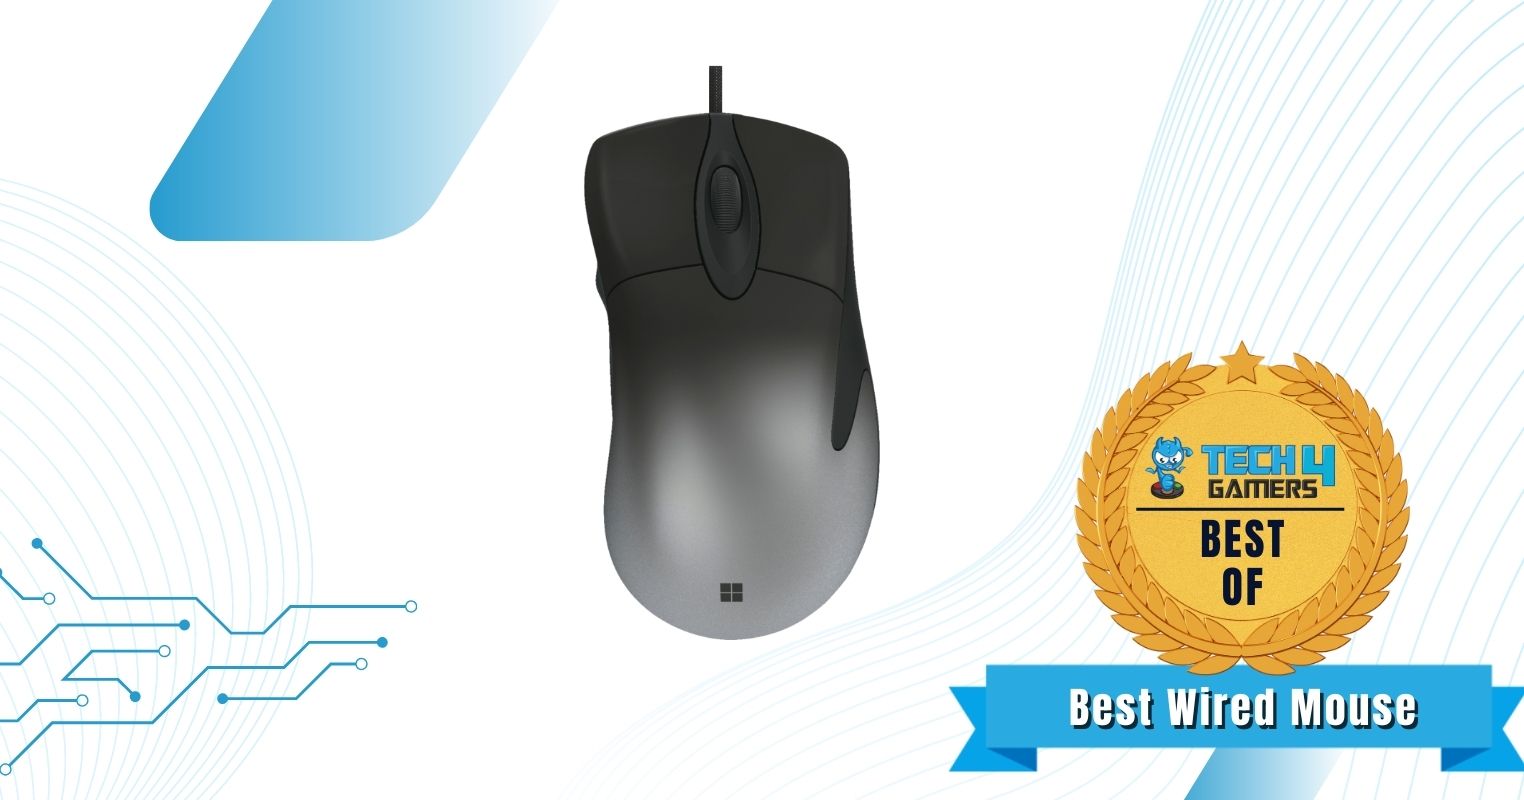 Best Wired Mouse For Graphic Designing - Microsoft Intellimouse Pro